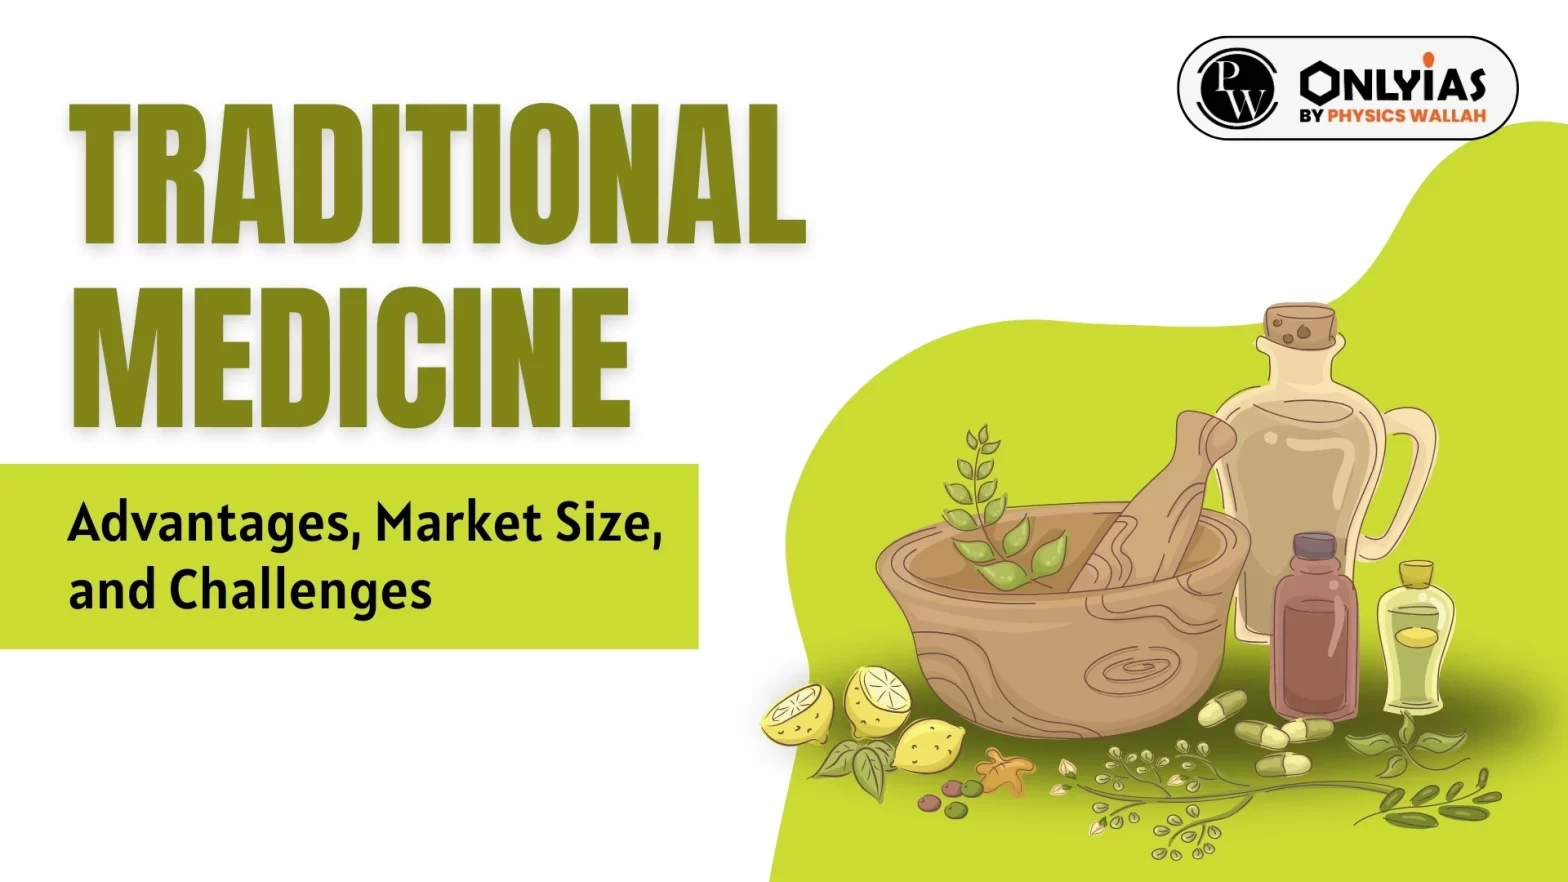 Traditional Medicine: Advantages, Market Size, and Challenges